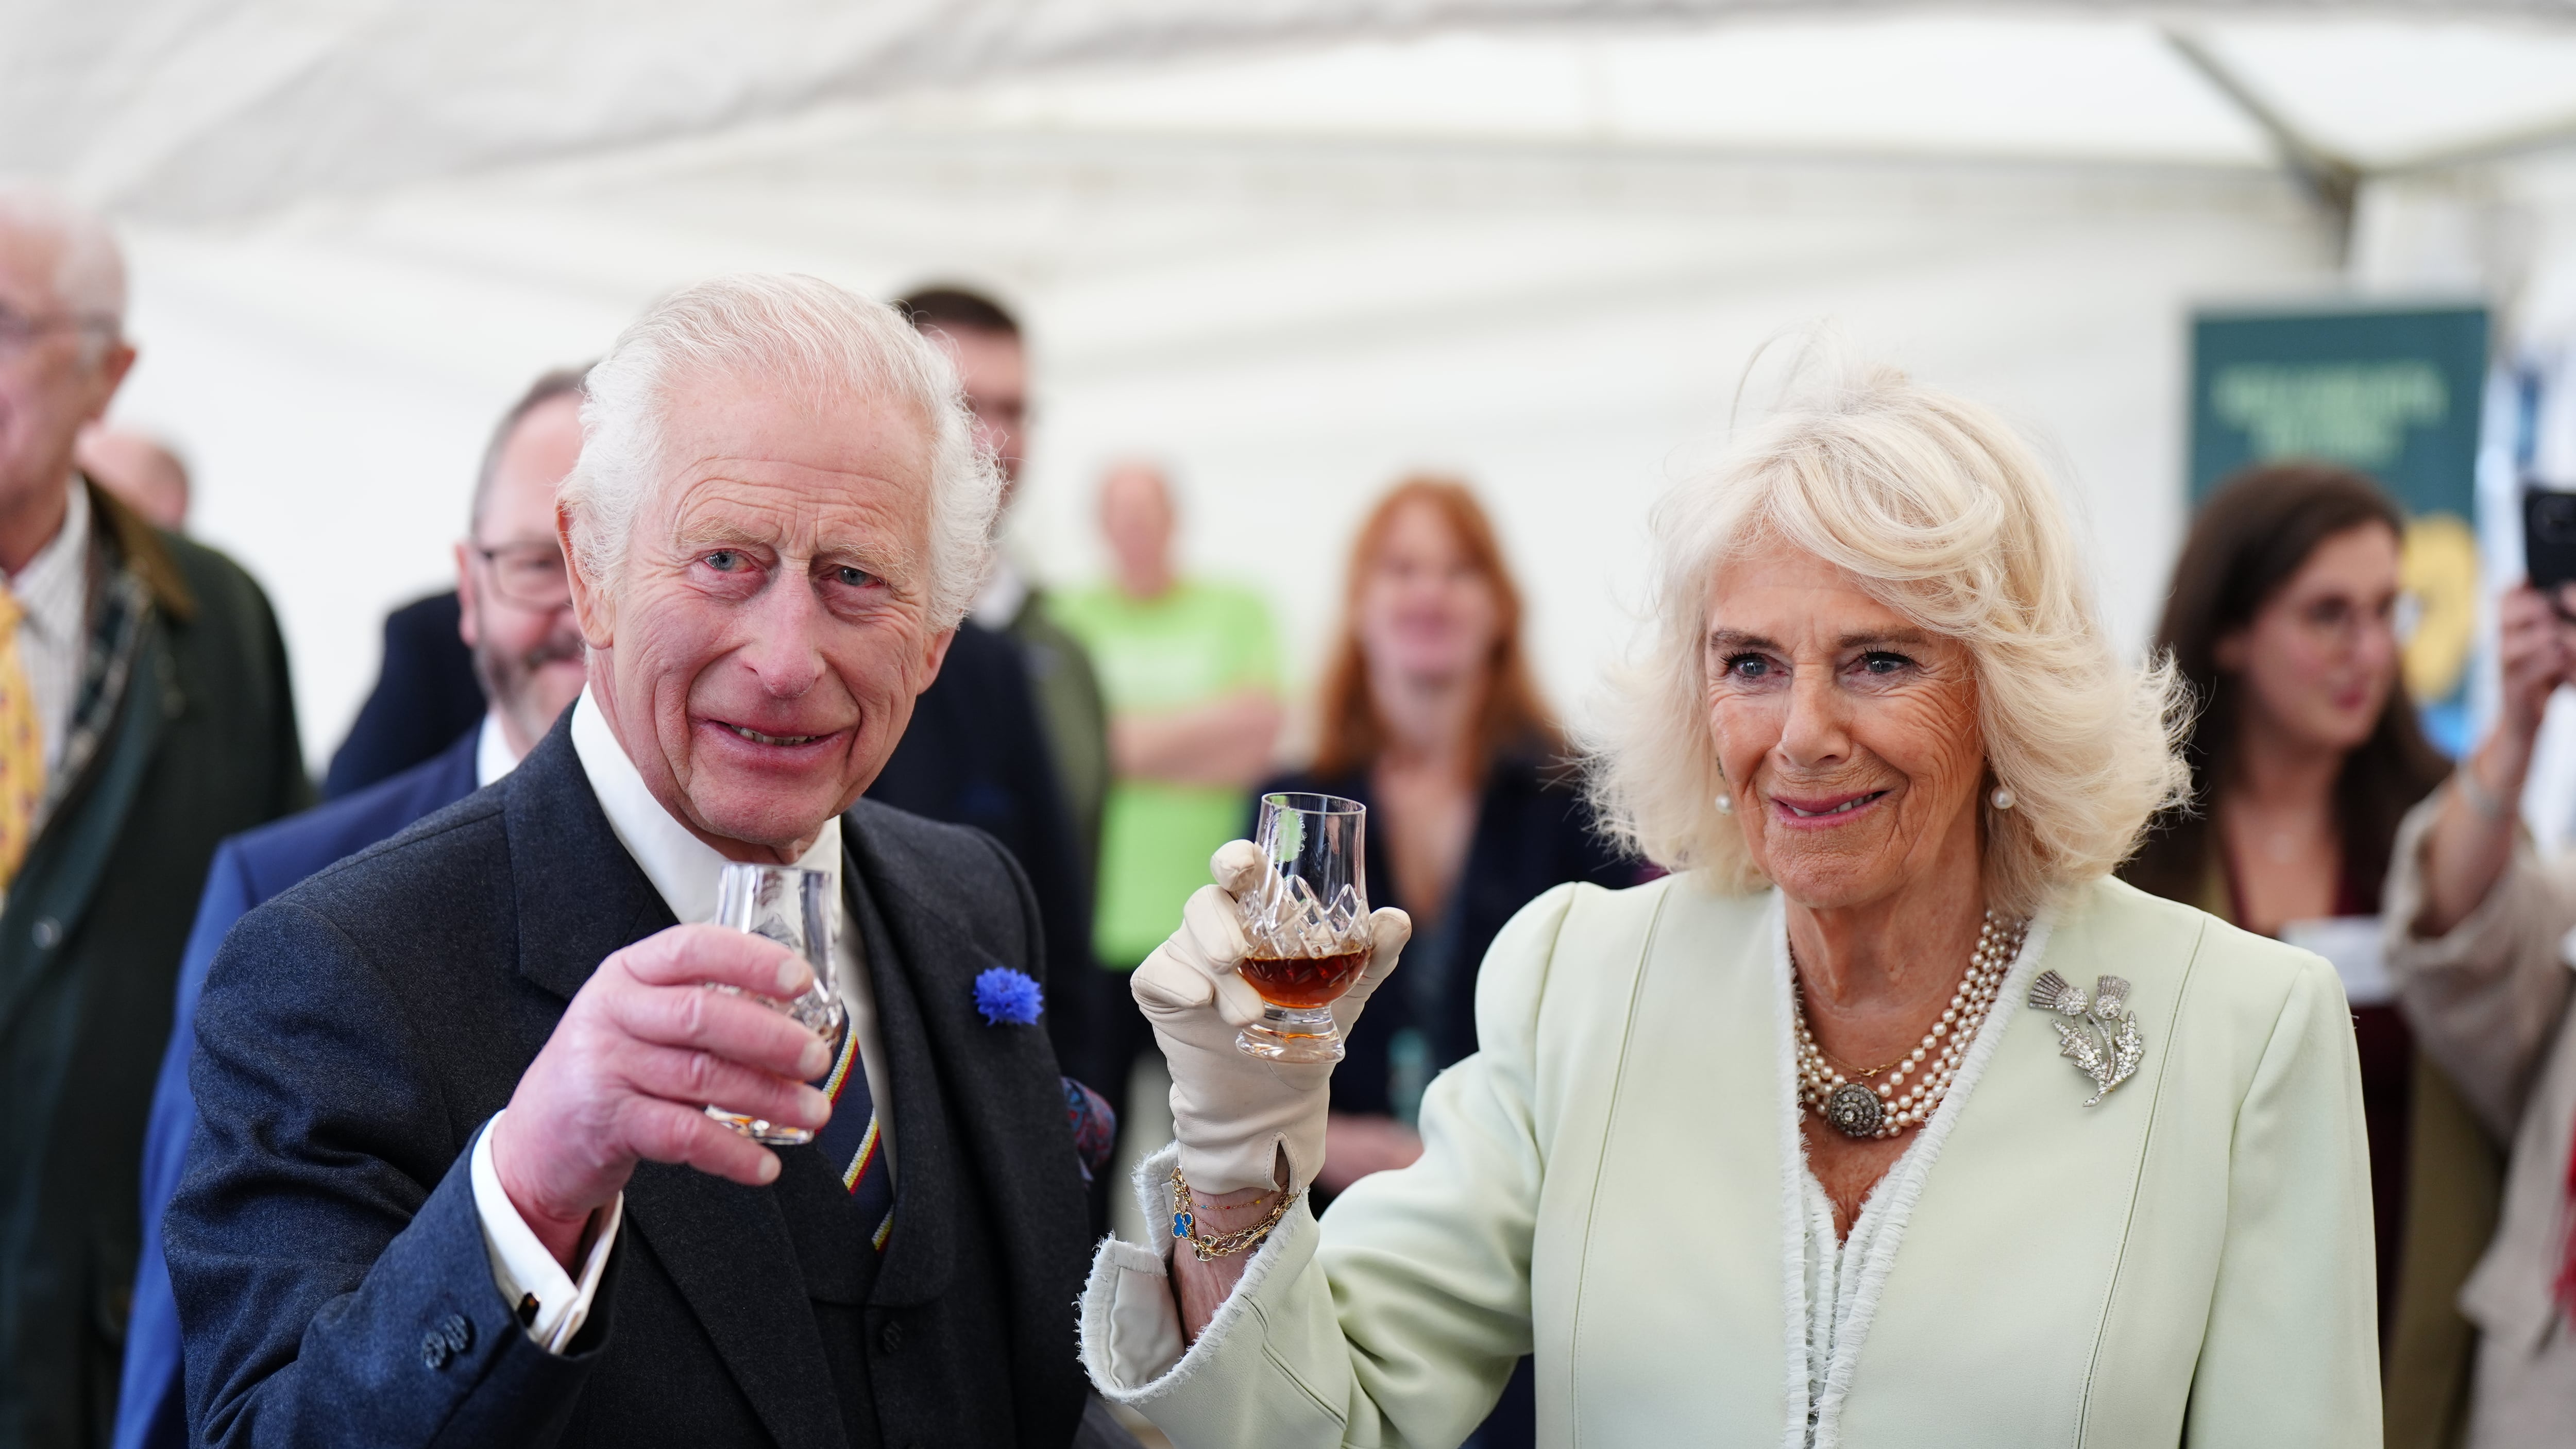 The King and Queen try a glass of whisky as they attend a celebration at Edinburgh Castle to mark the 900th anniversary of the City of Edinburgh